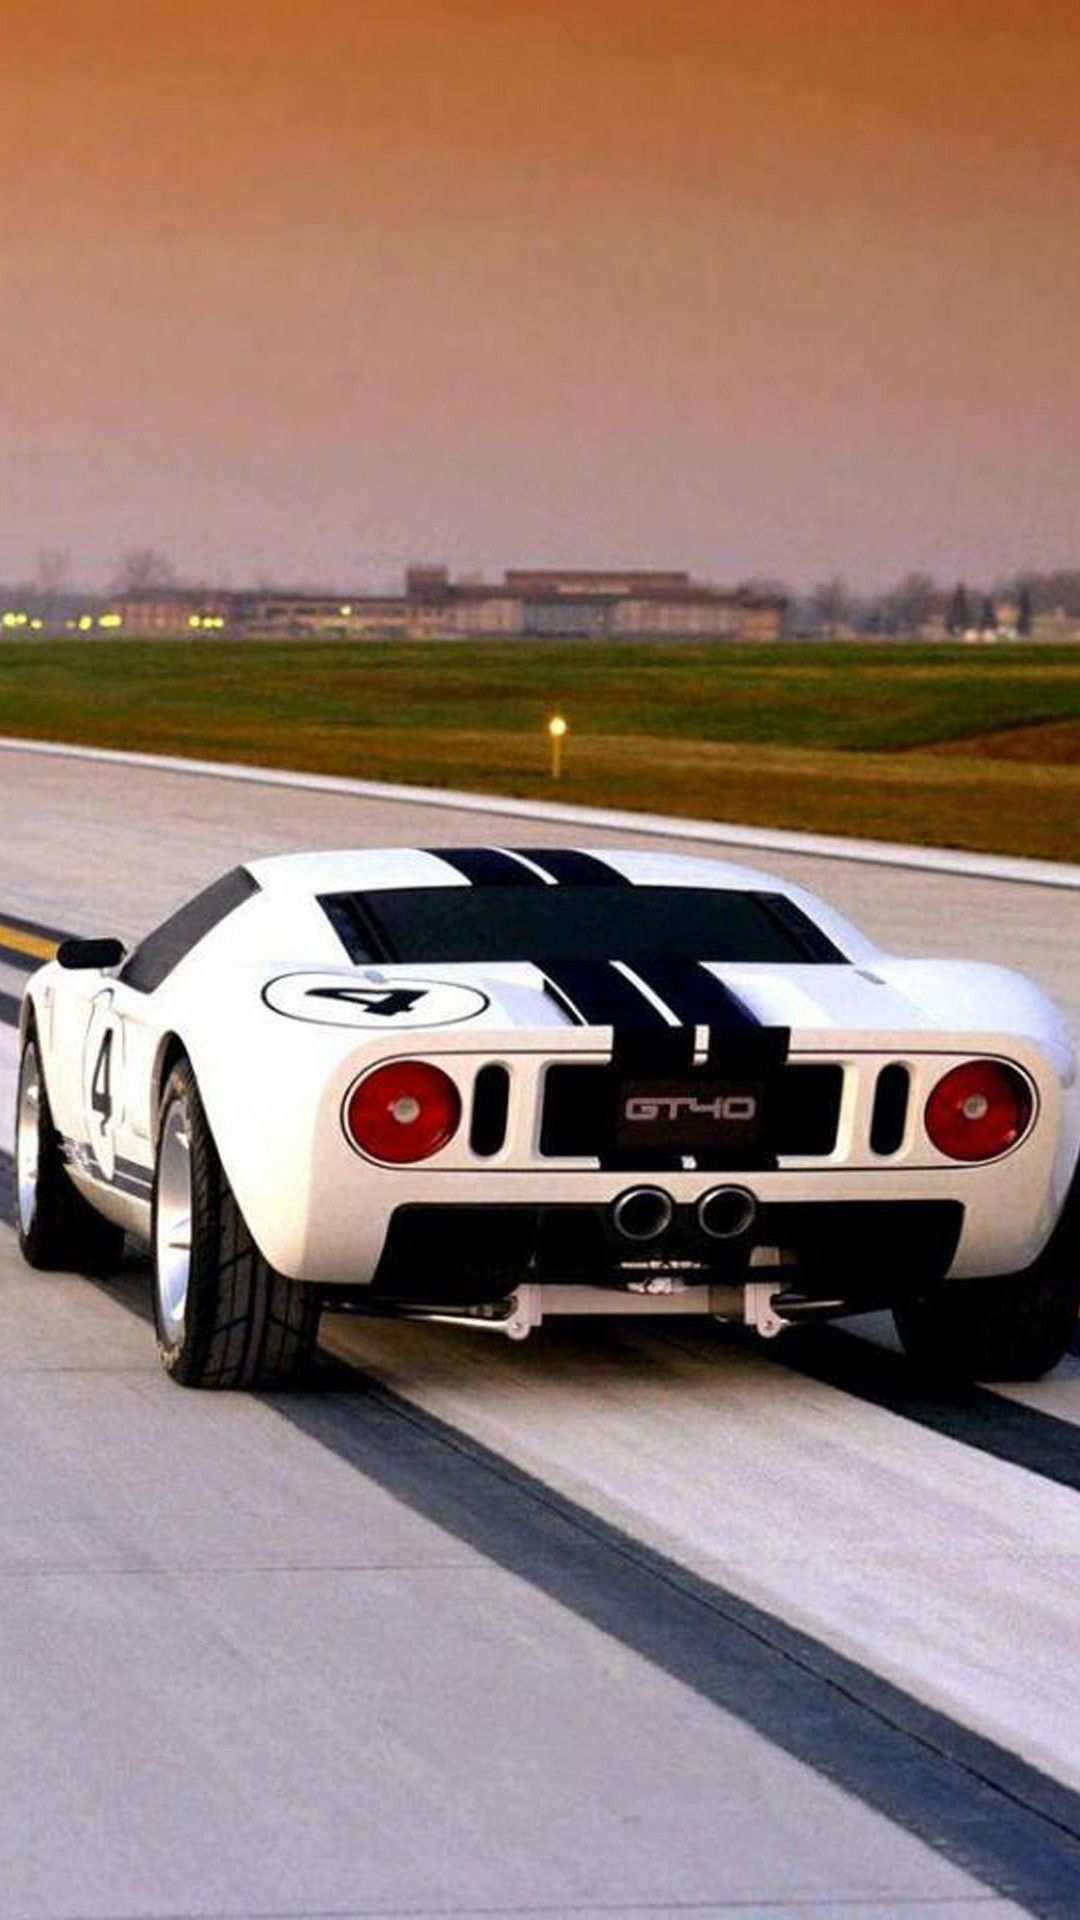 Ford Gt40 2020 iPhone Wallpapers - Wallpaper Cave